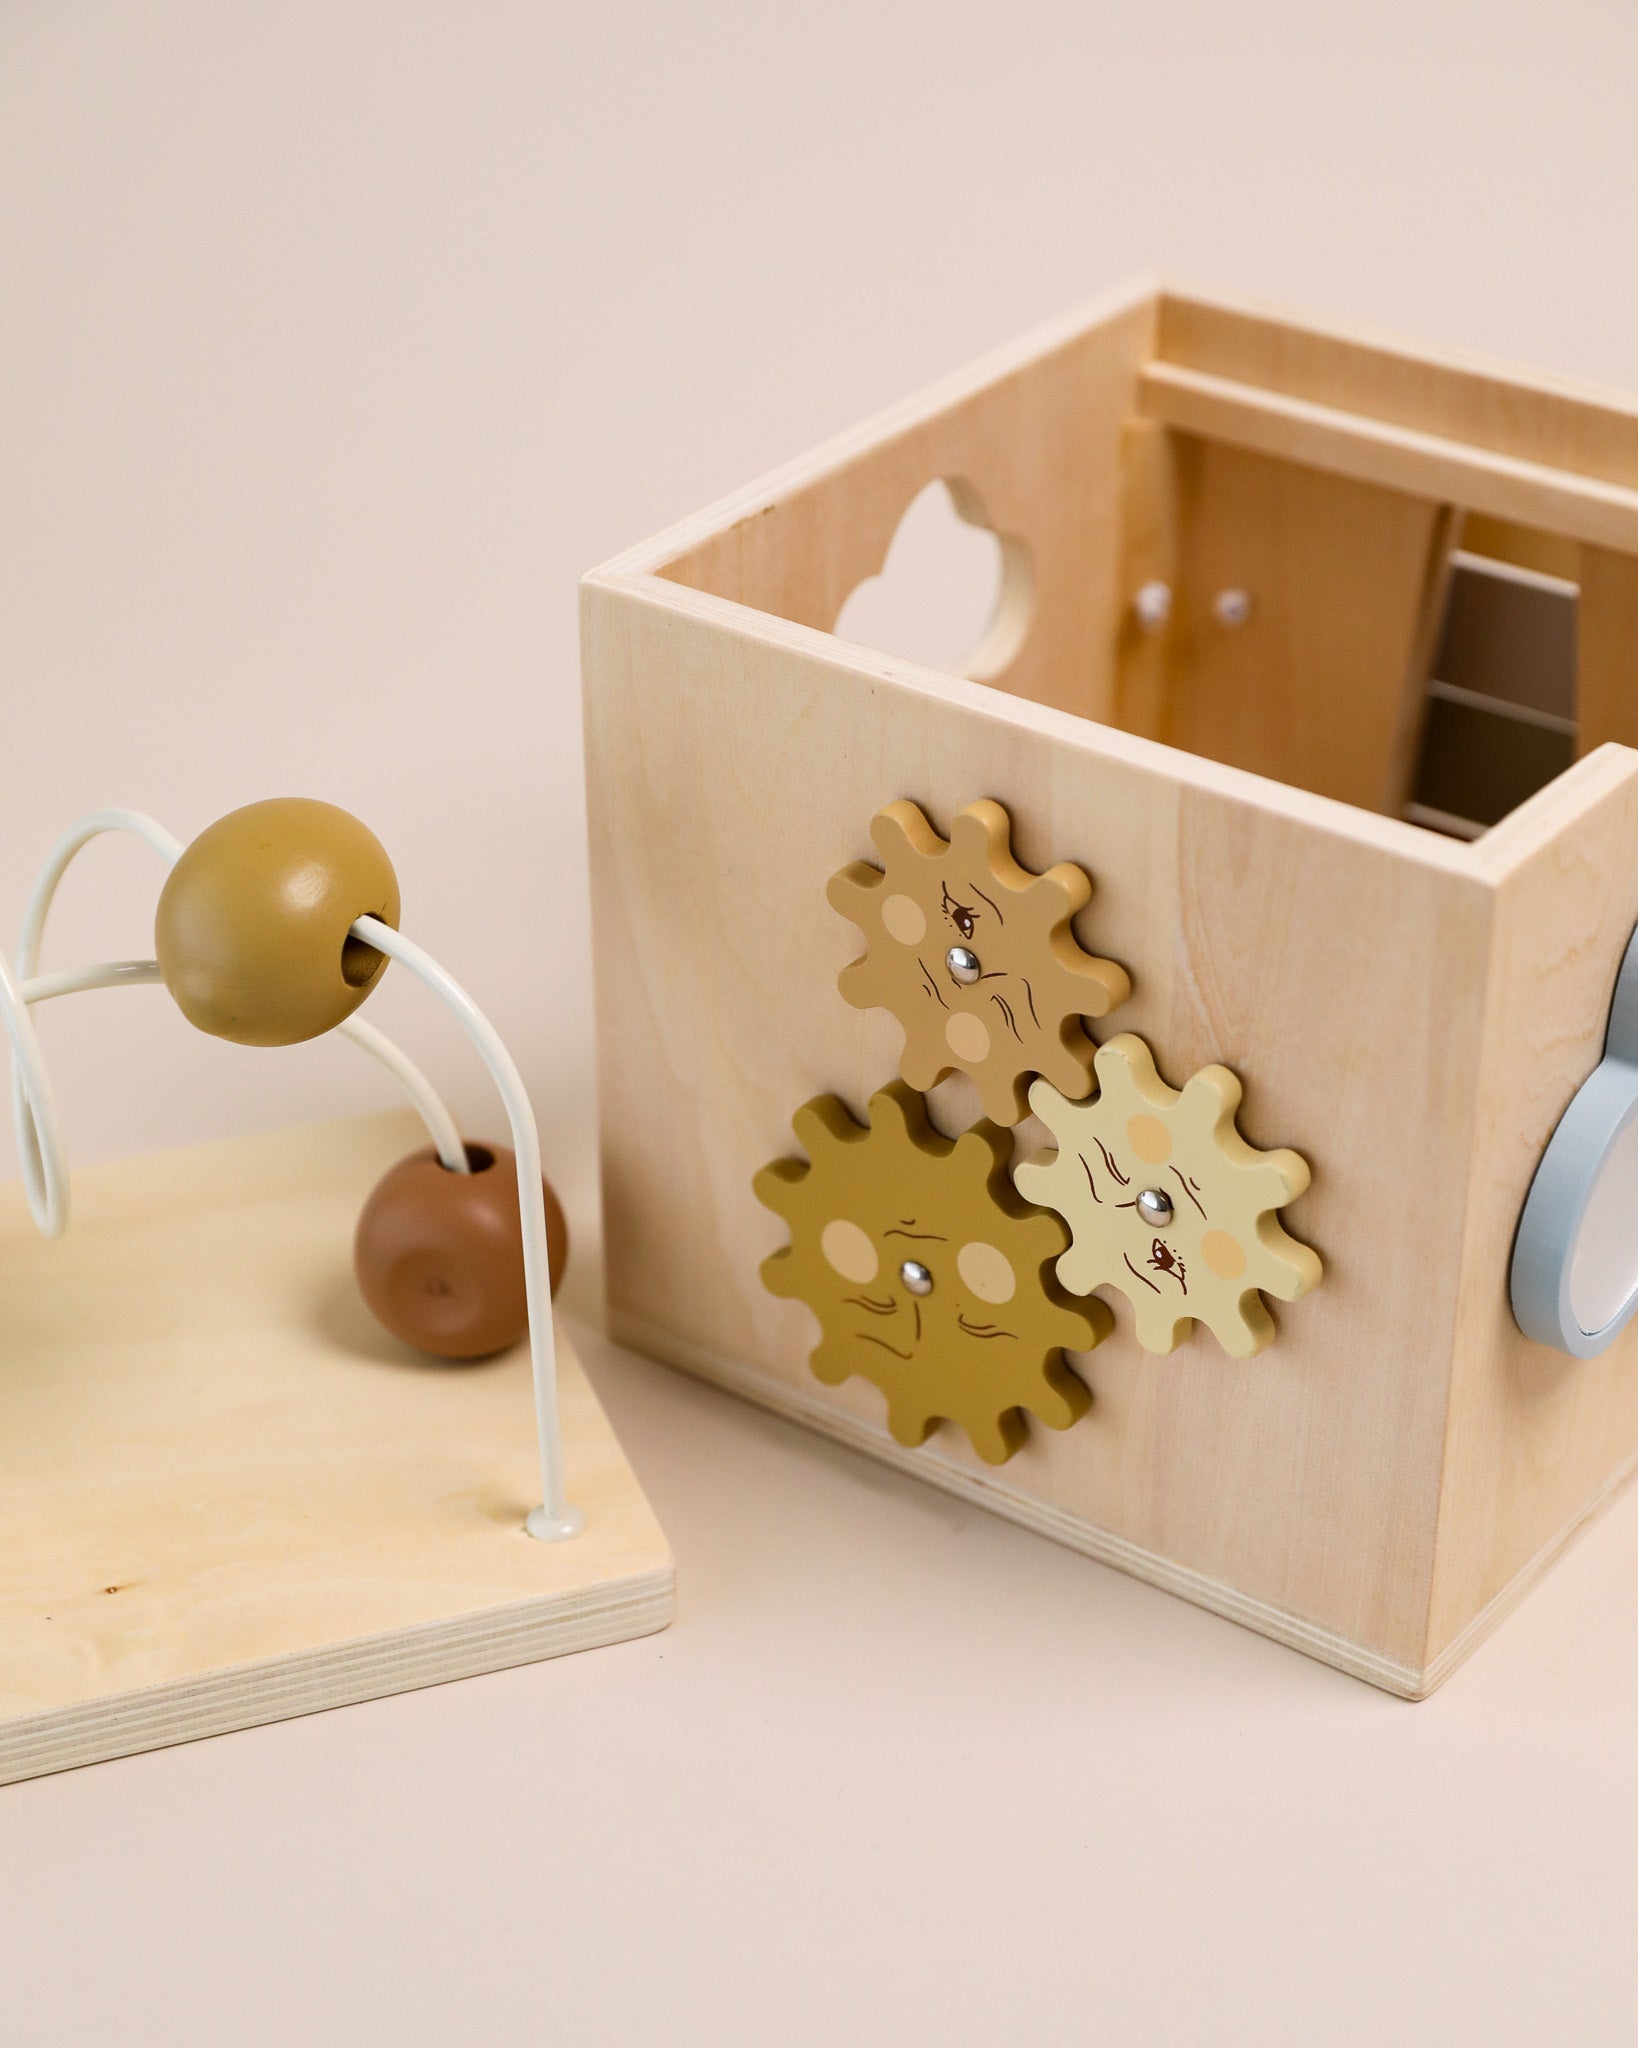 Busy Cube Toy,Sensory Wooden Busy Essentials Cube Algeria